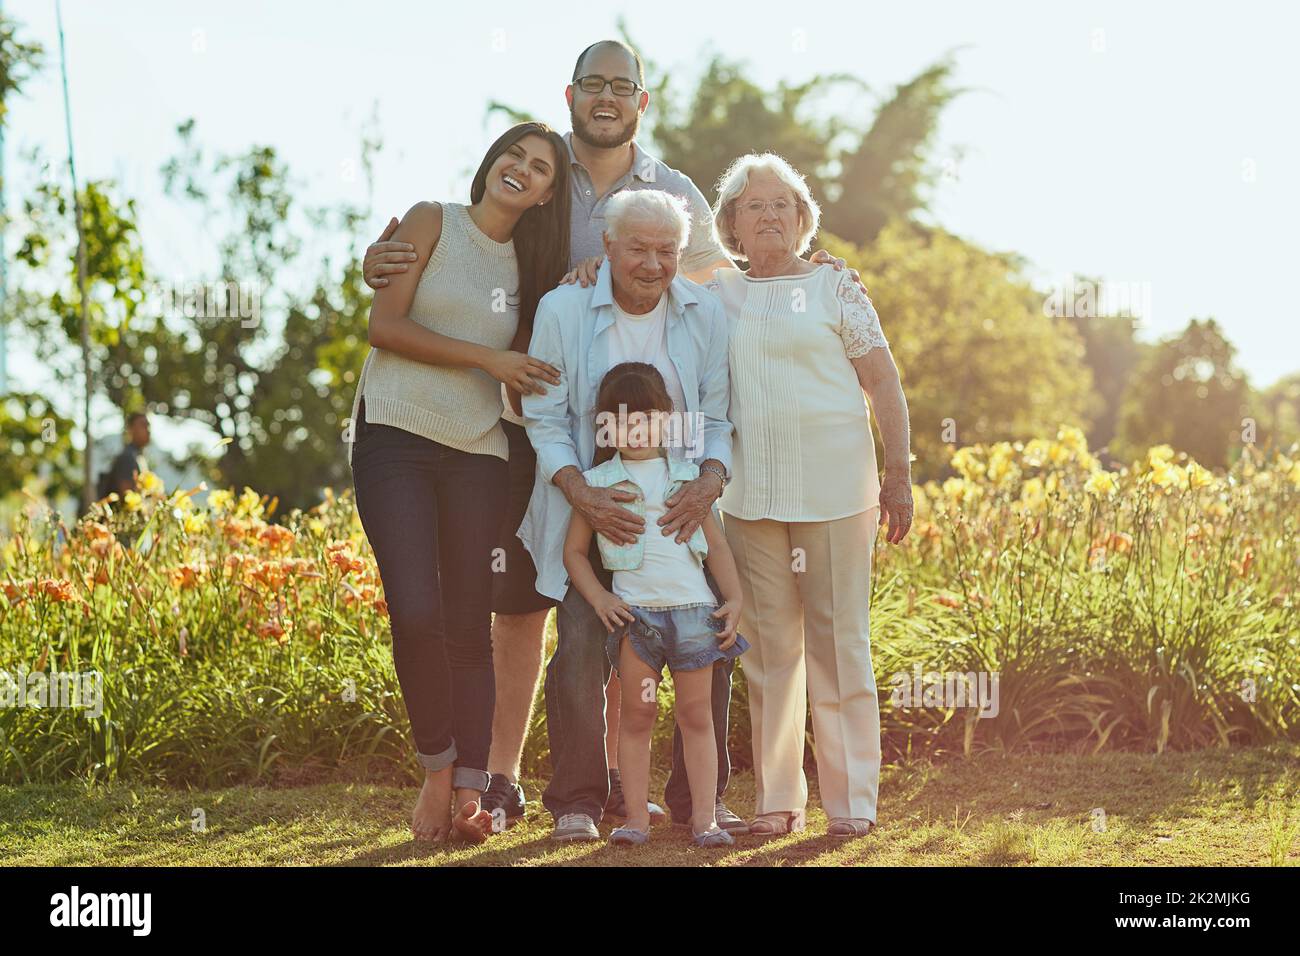 Lifes best blessing Family. Shot of a happy family of three generations spending quality time together in the park. Stock Photo